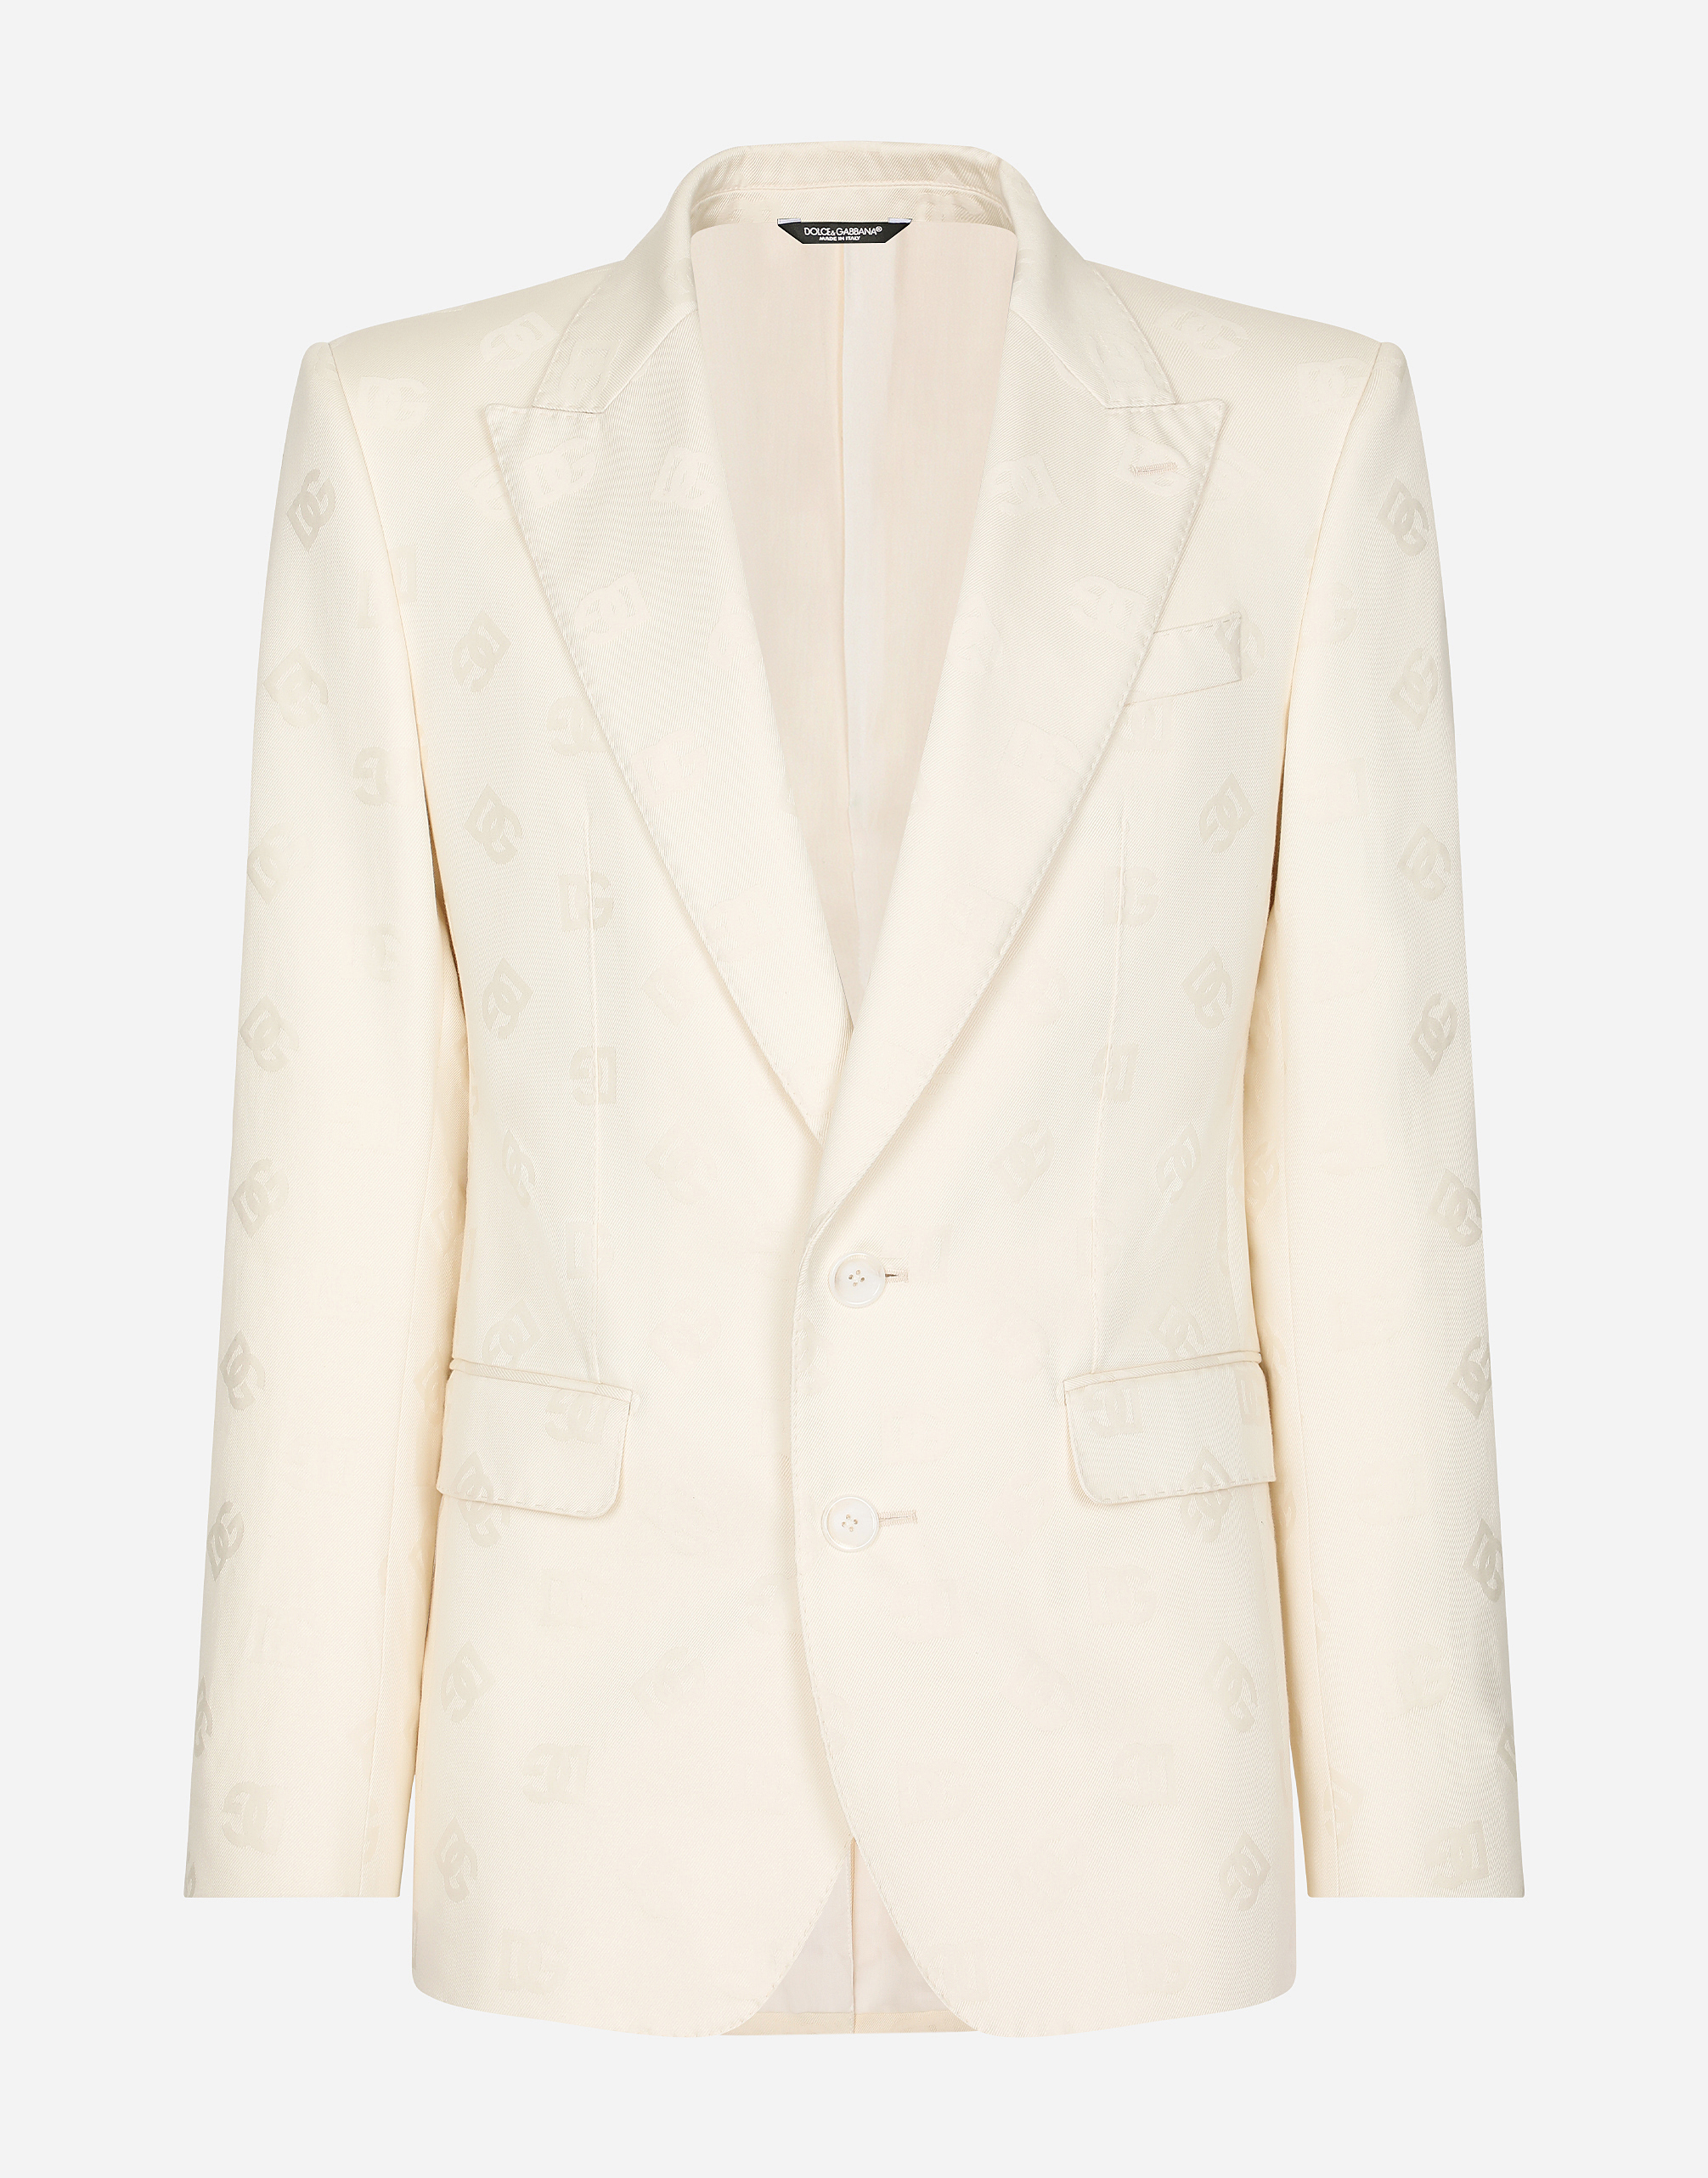 Dolce & Gabbana Single-breasted Cotton Sicilia-fit Jacket With Jacquard Dg Details In White